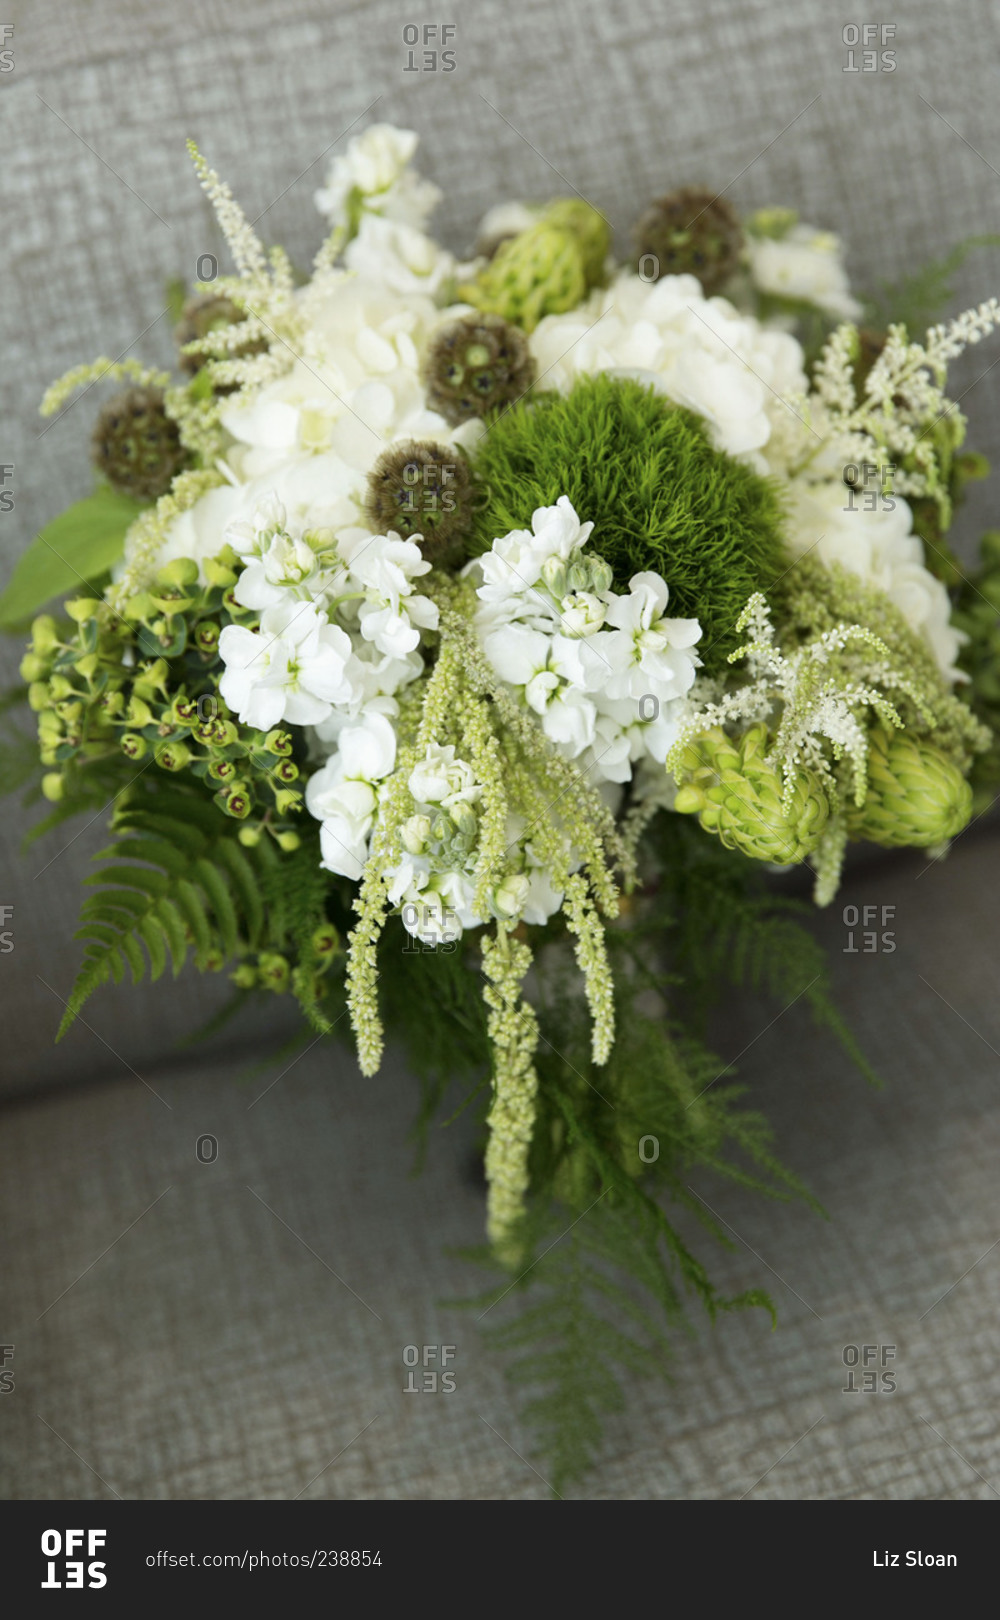 Bridal bouquet with white flowers and ferns